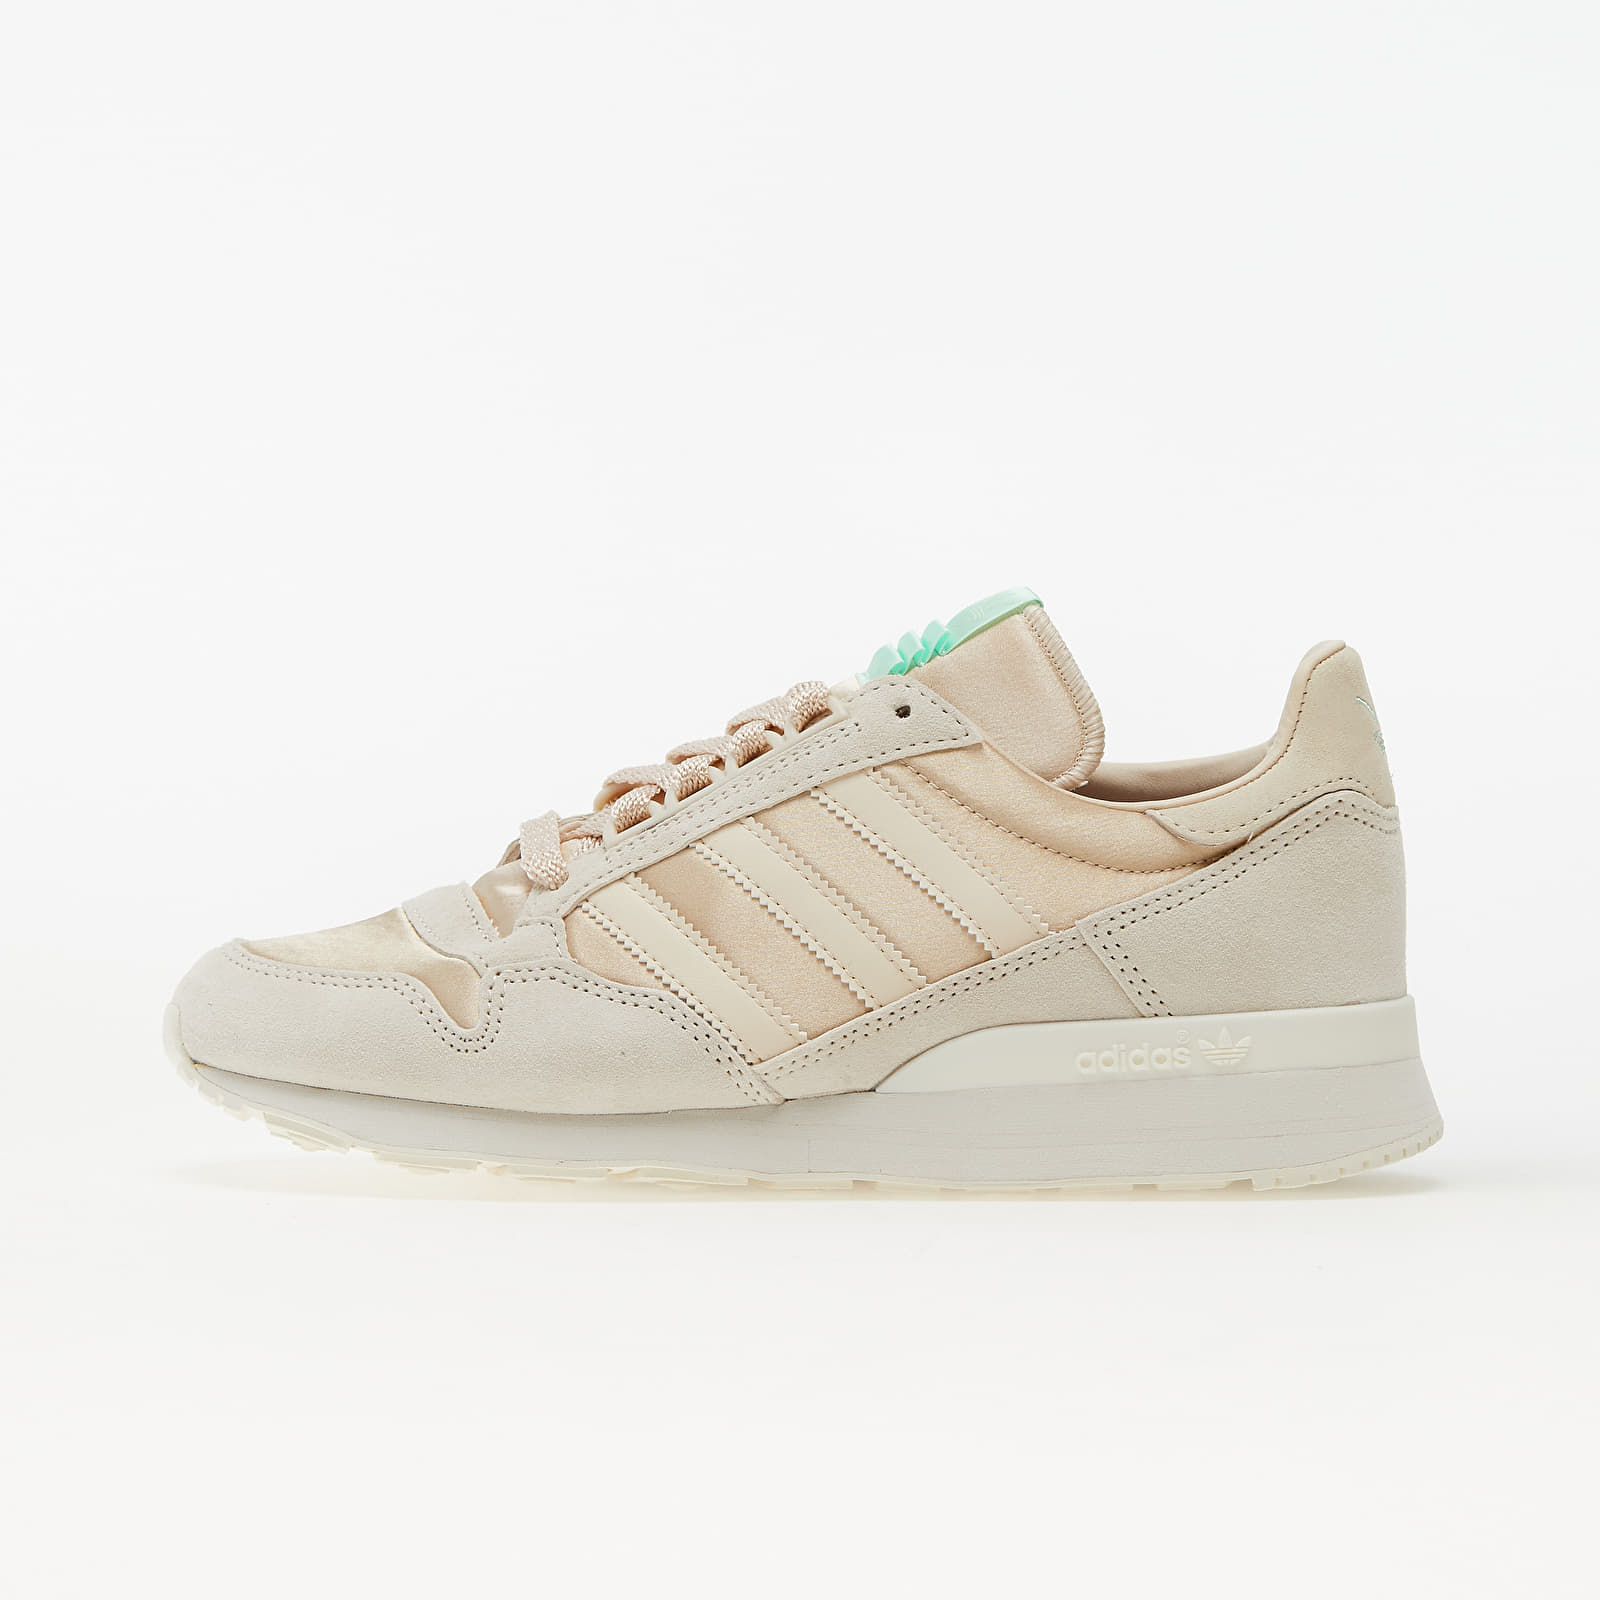 Chaussures et baskets femme adidas ZX 500 W Halo Ivory/ Linen/ Core White